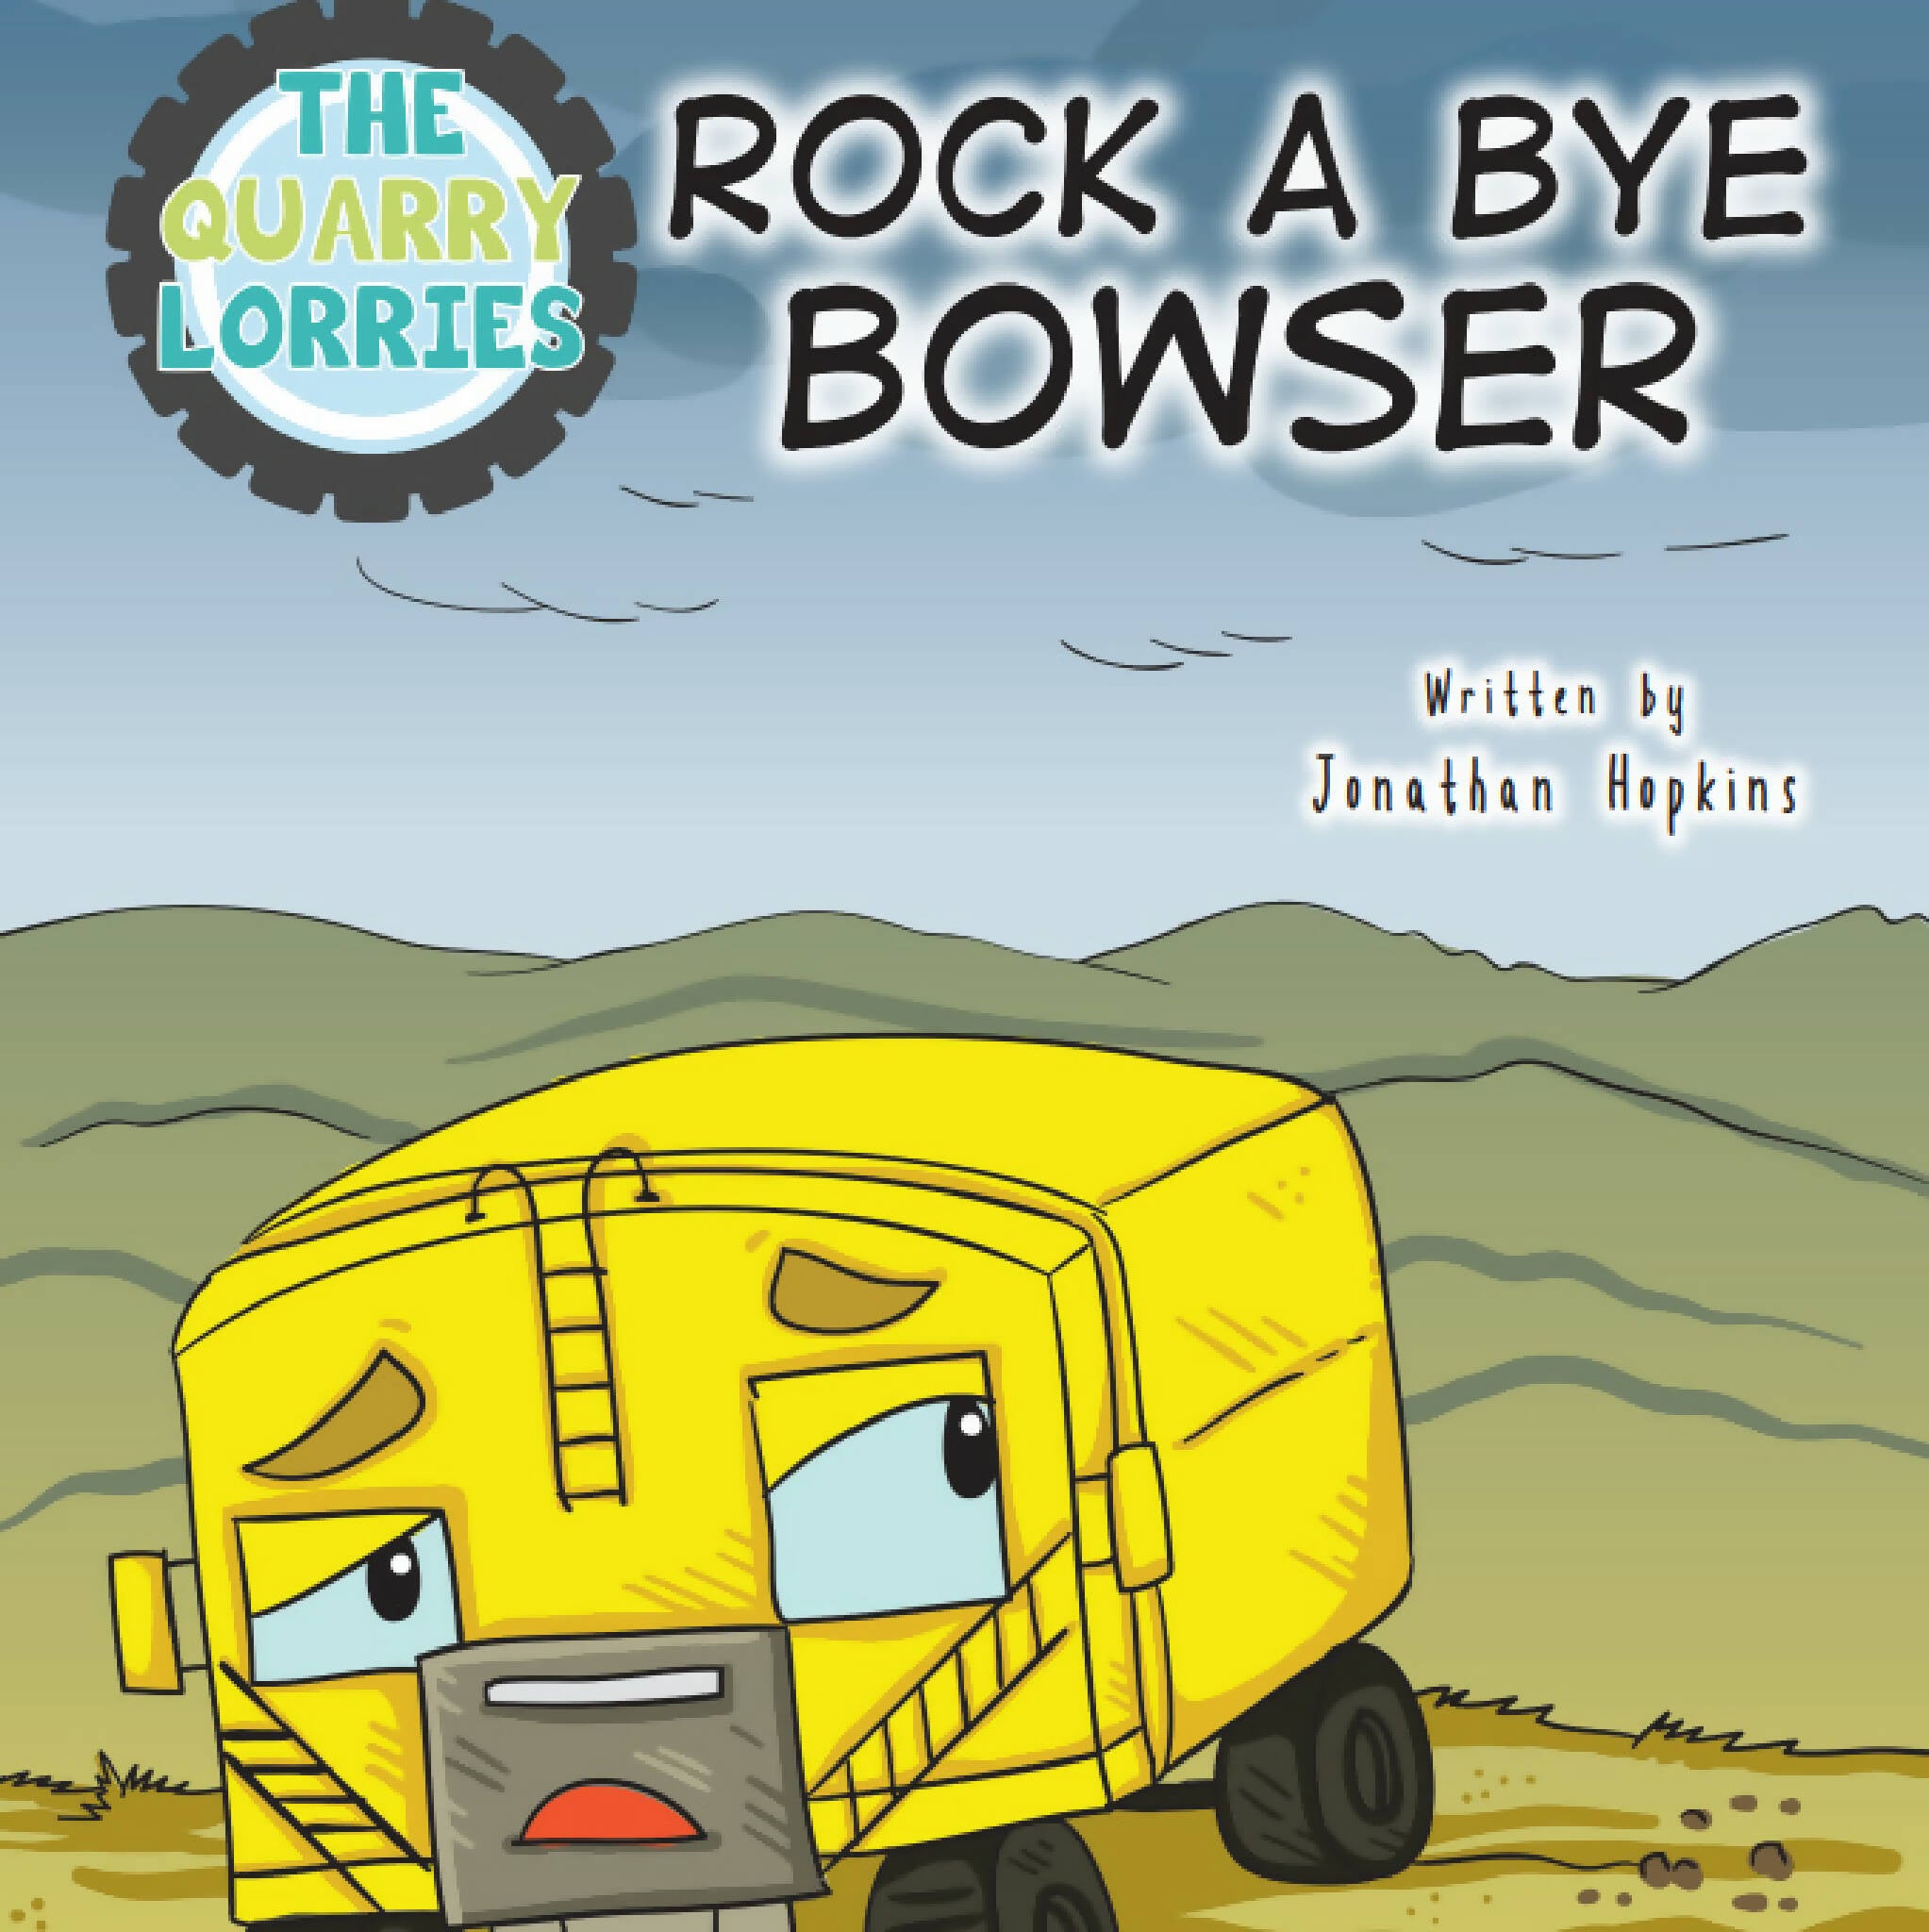 The Quarry Lorries: Rock a Bye Bowser